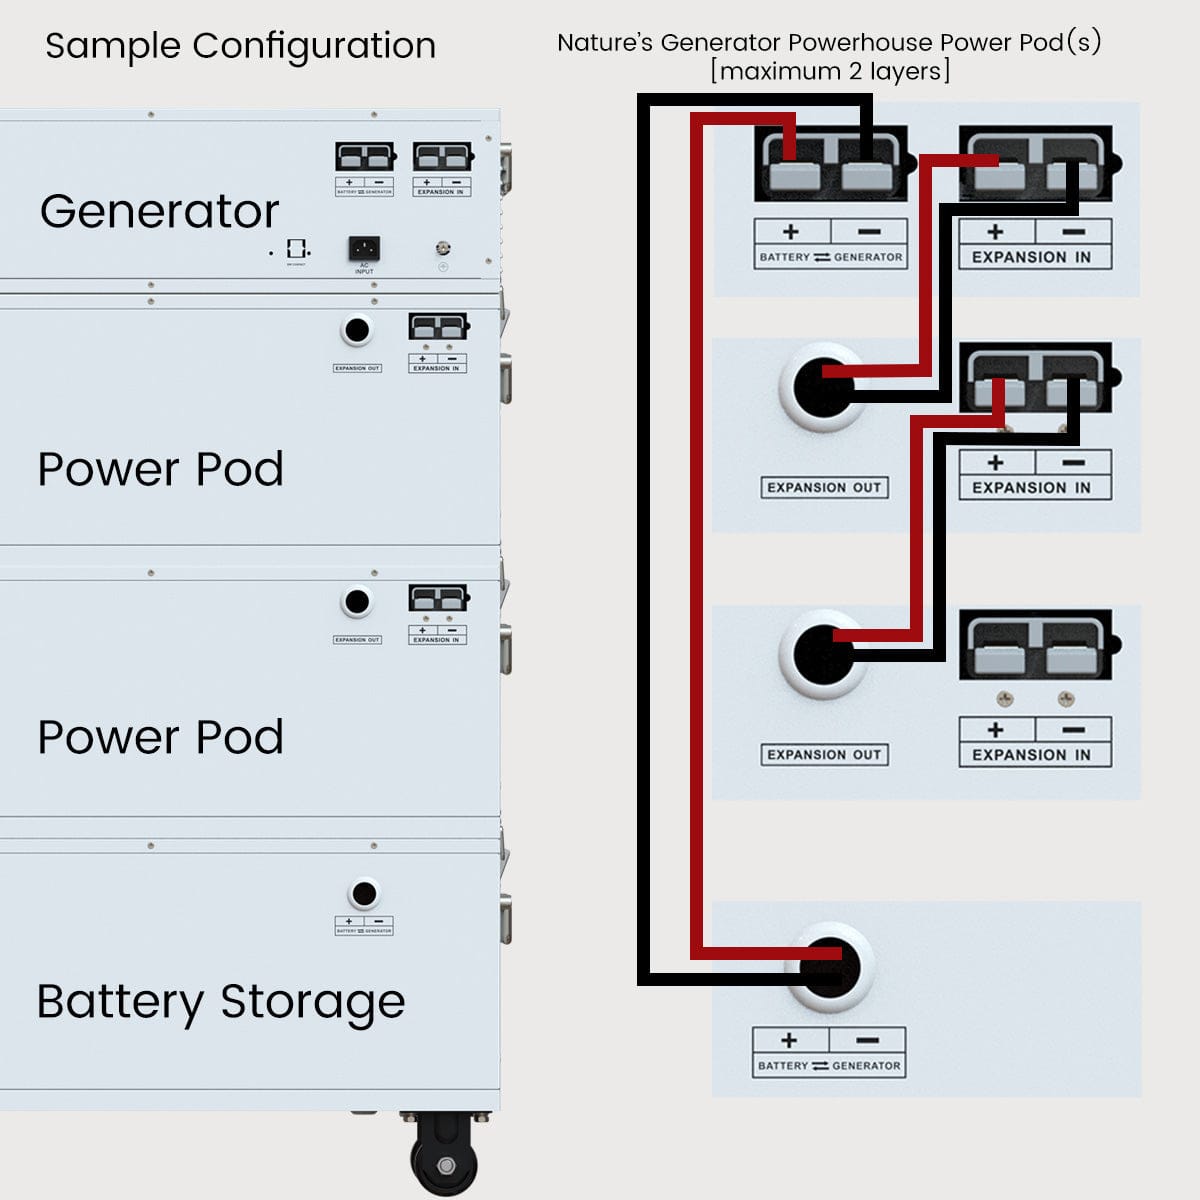 Sample Config Powerhouse with Two Pods